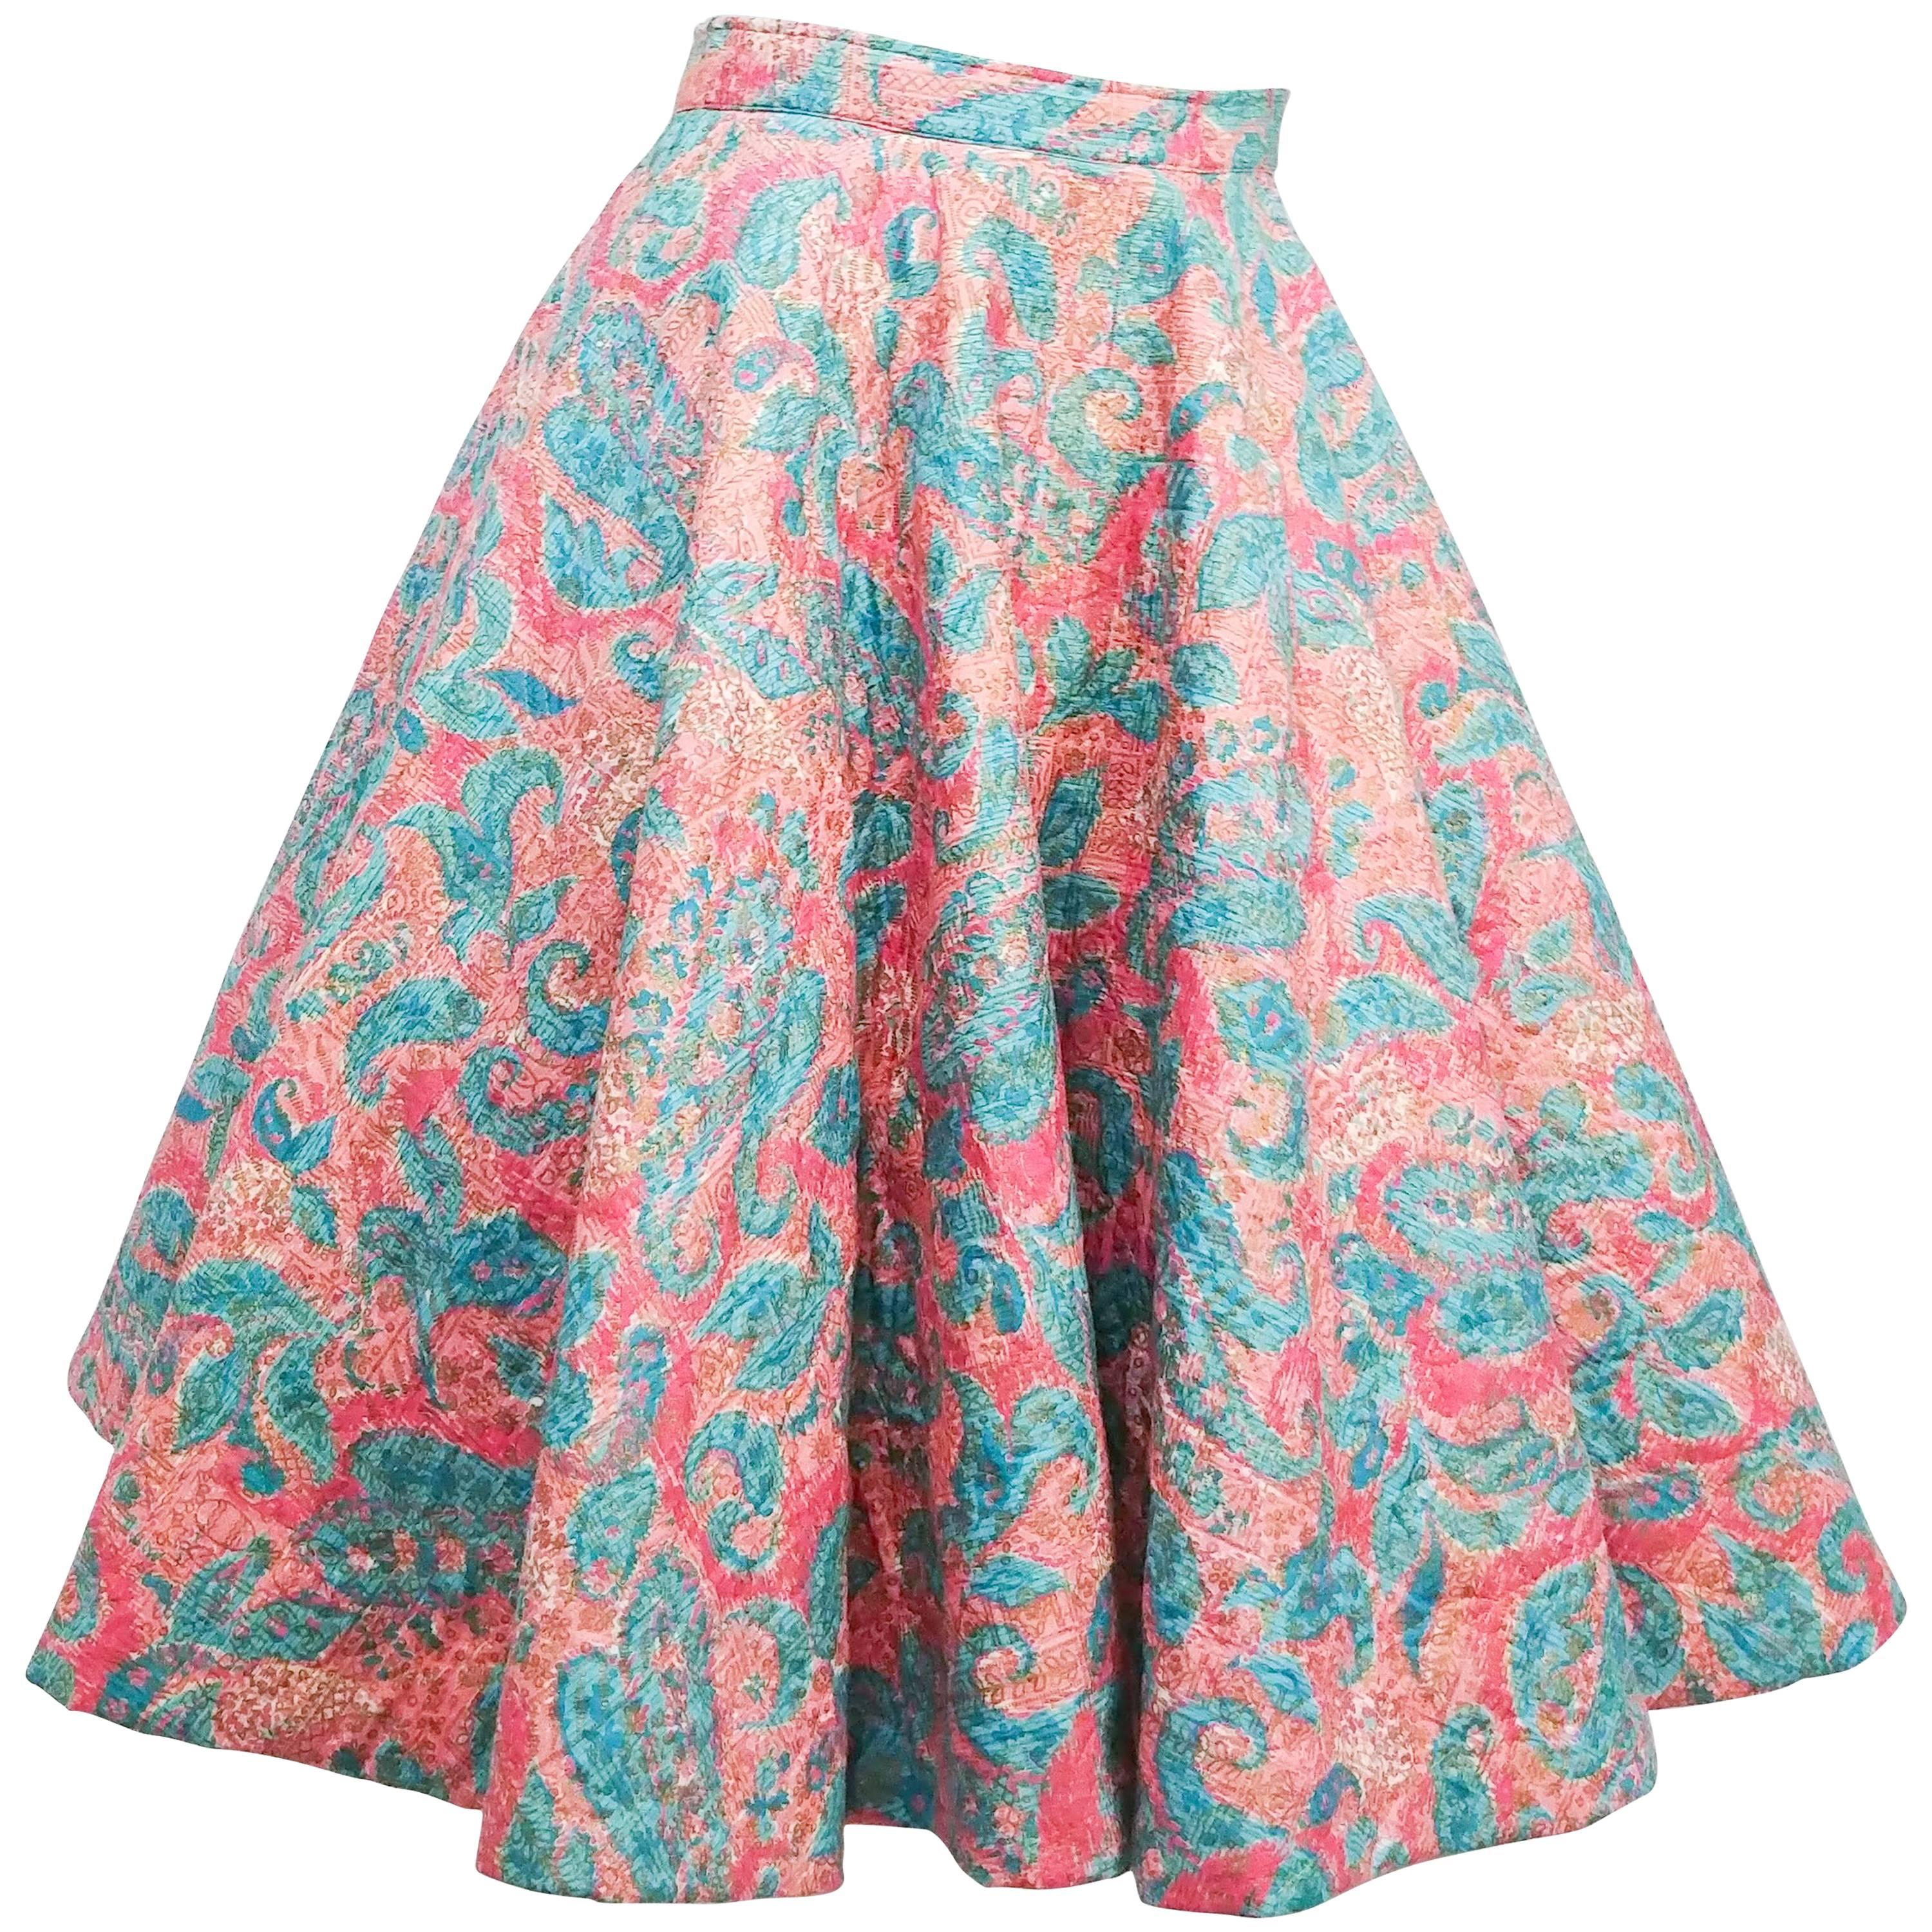 1950s Quilted Cotton Print Circle Skirt